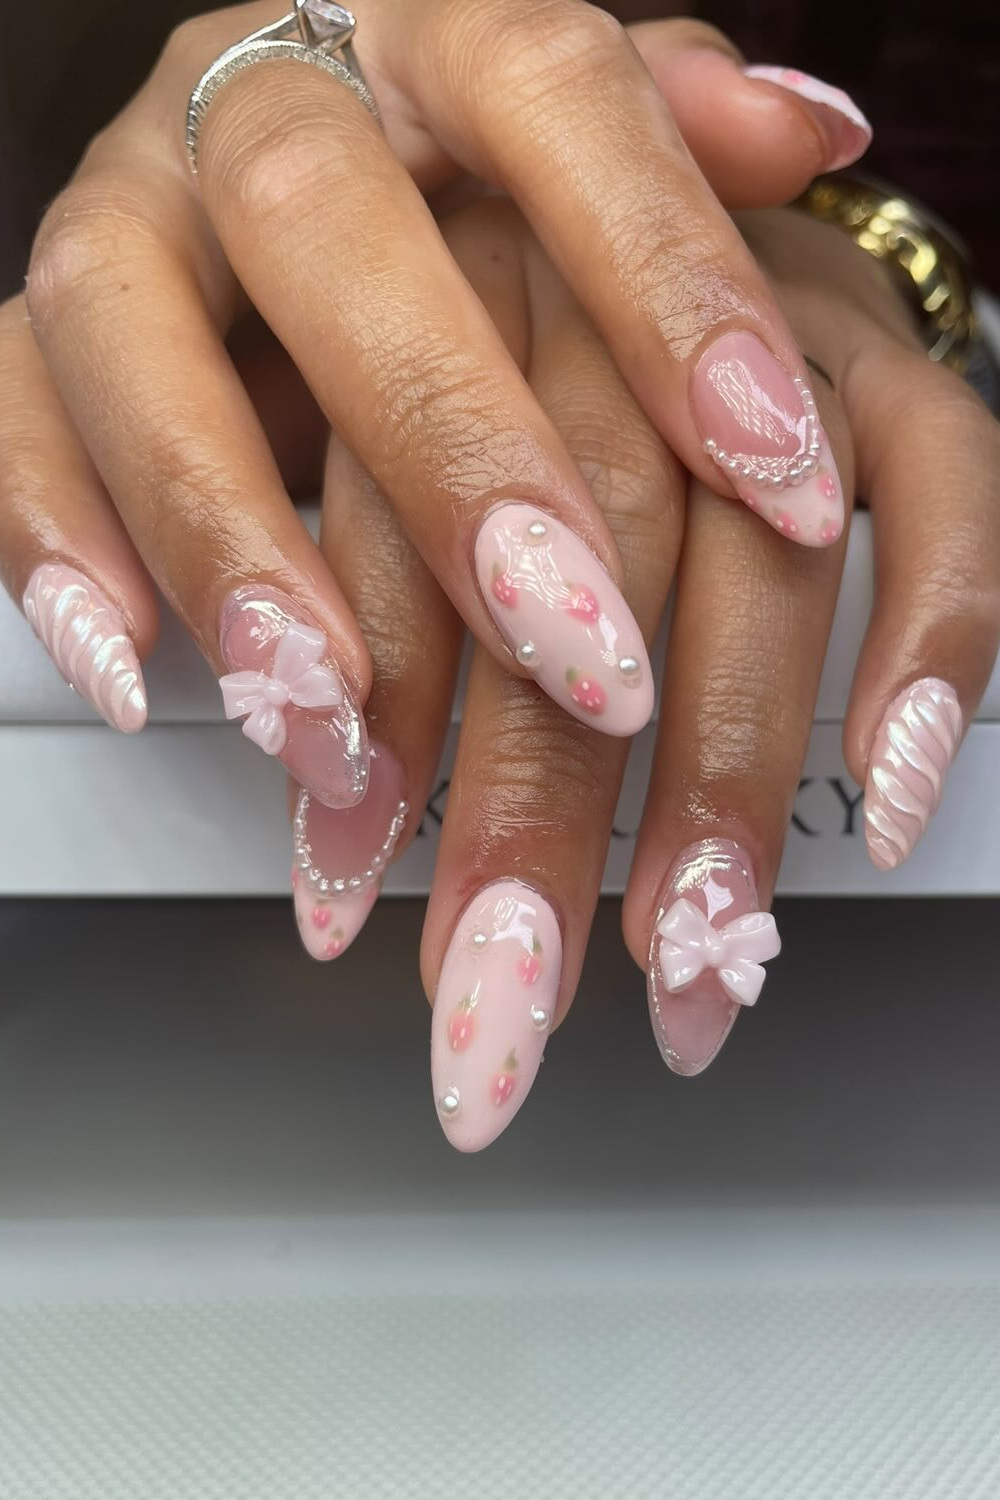 Coquette Nails Are (Still) Trending – Here's Why